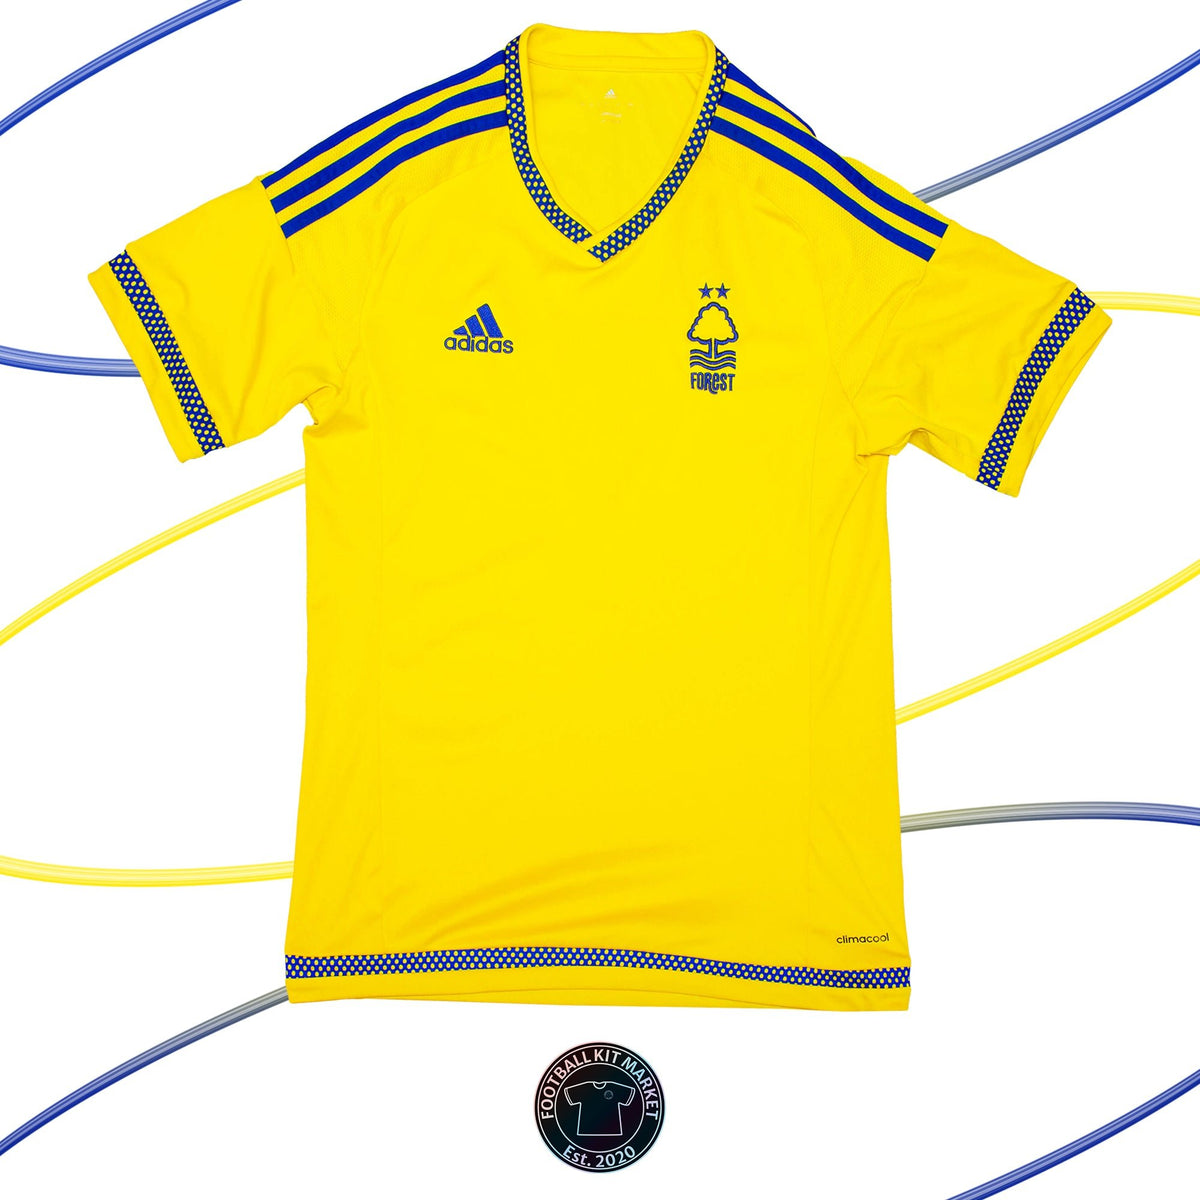 Genuine NOTTINGHAM FOREST Away Shirt (2015-2016) - ADIDAS (S) - Product Image from Football Kit Market